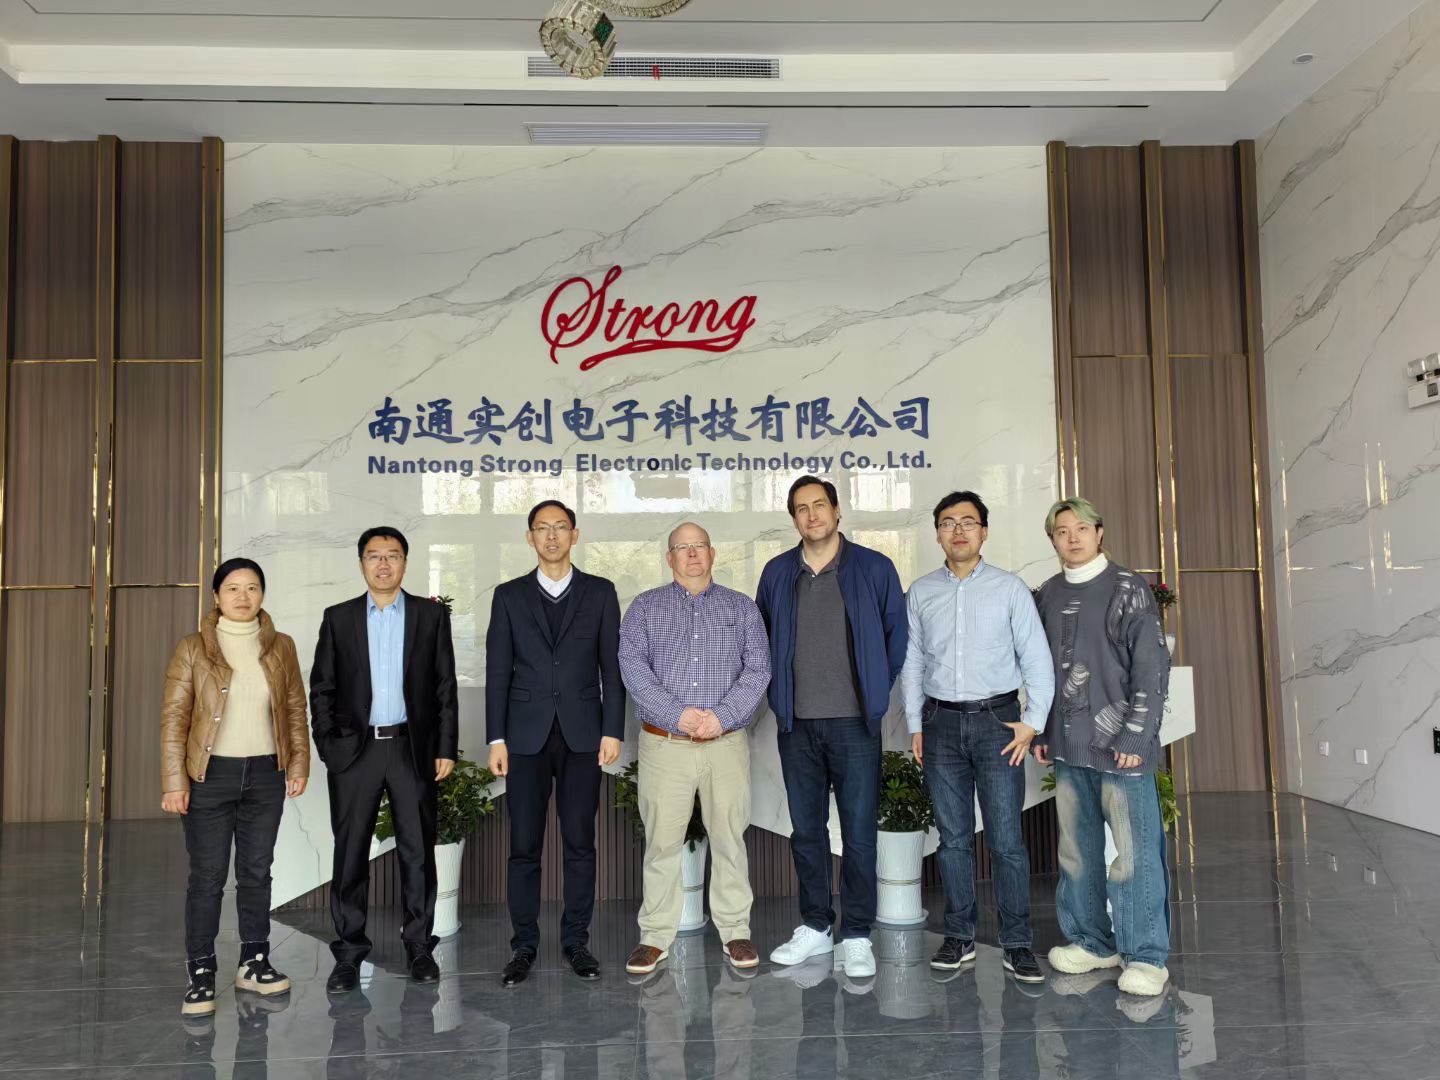 Canadian client visiting Nantong Strong Electronic Technology Co., Ltd